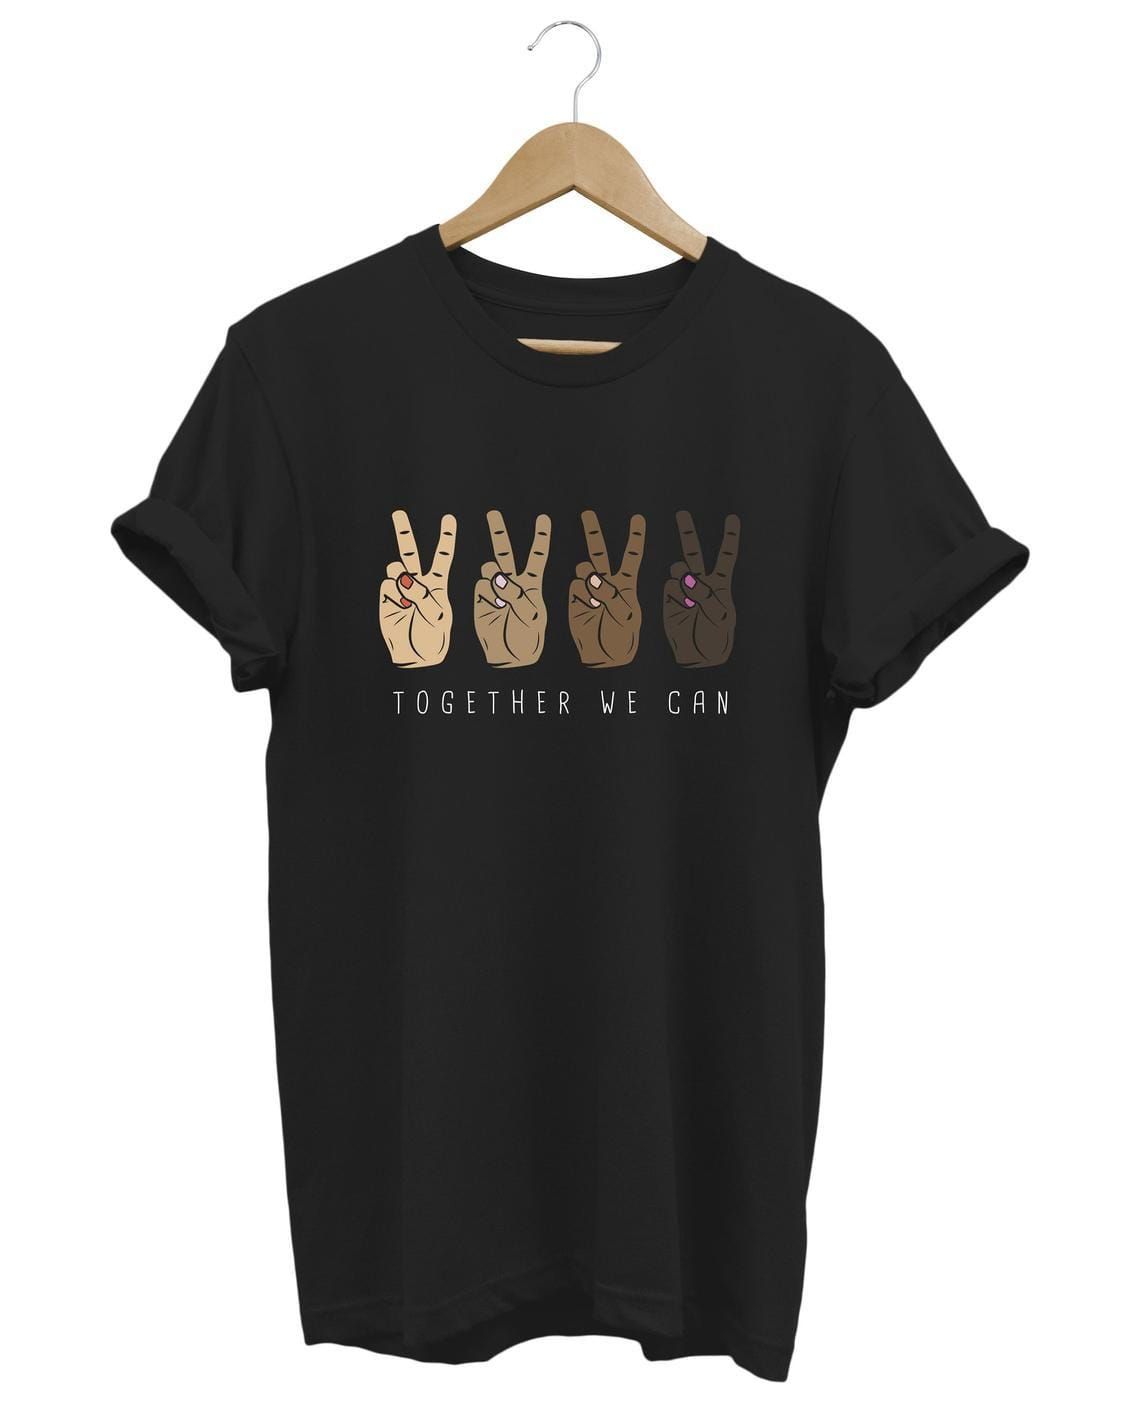 Together We Can T-Shirt